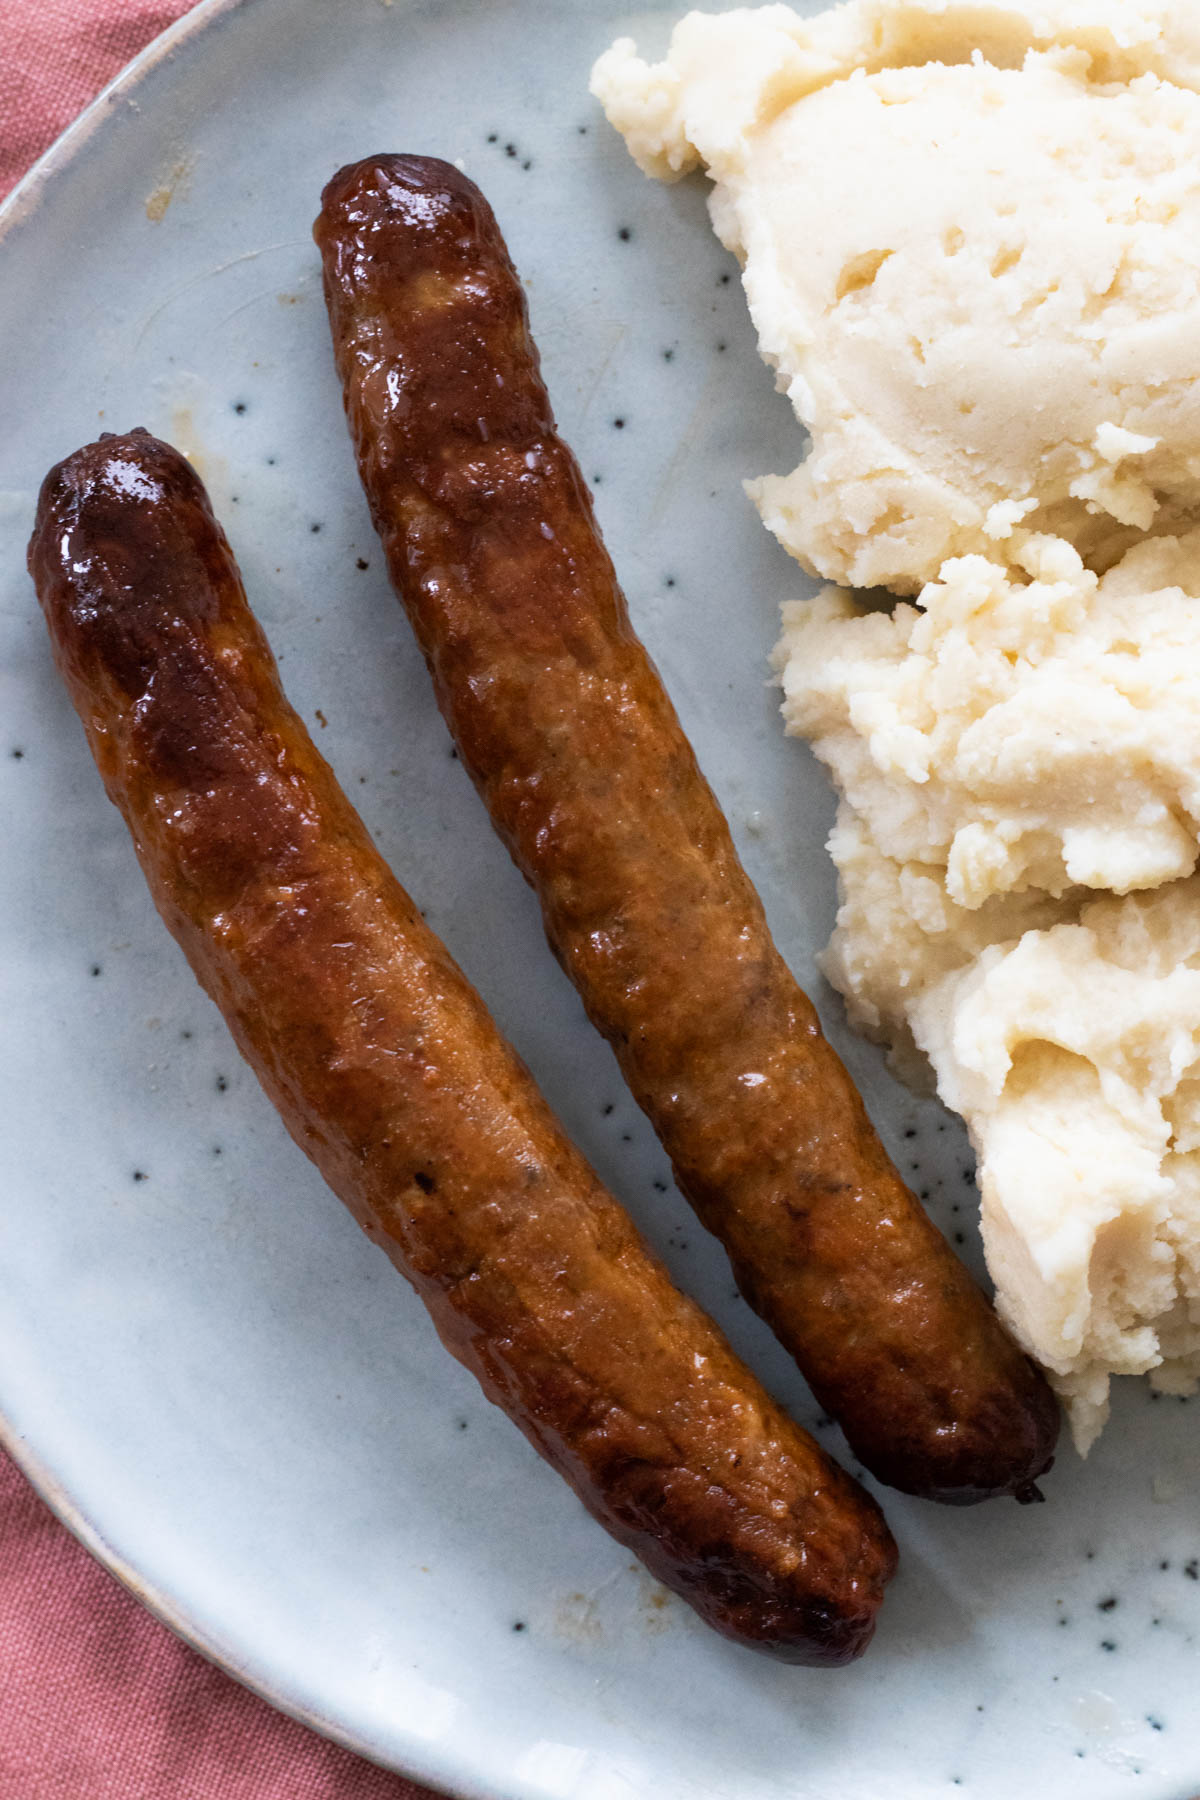 Sausages with mashed potatoes.